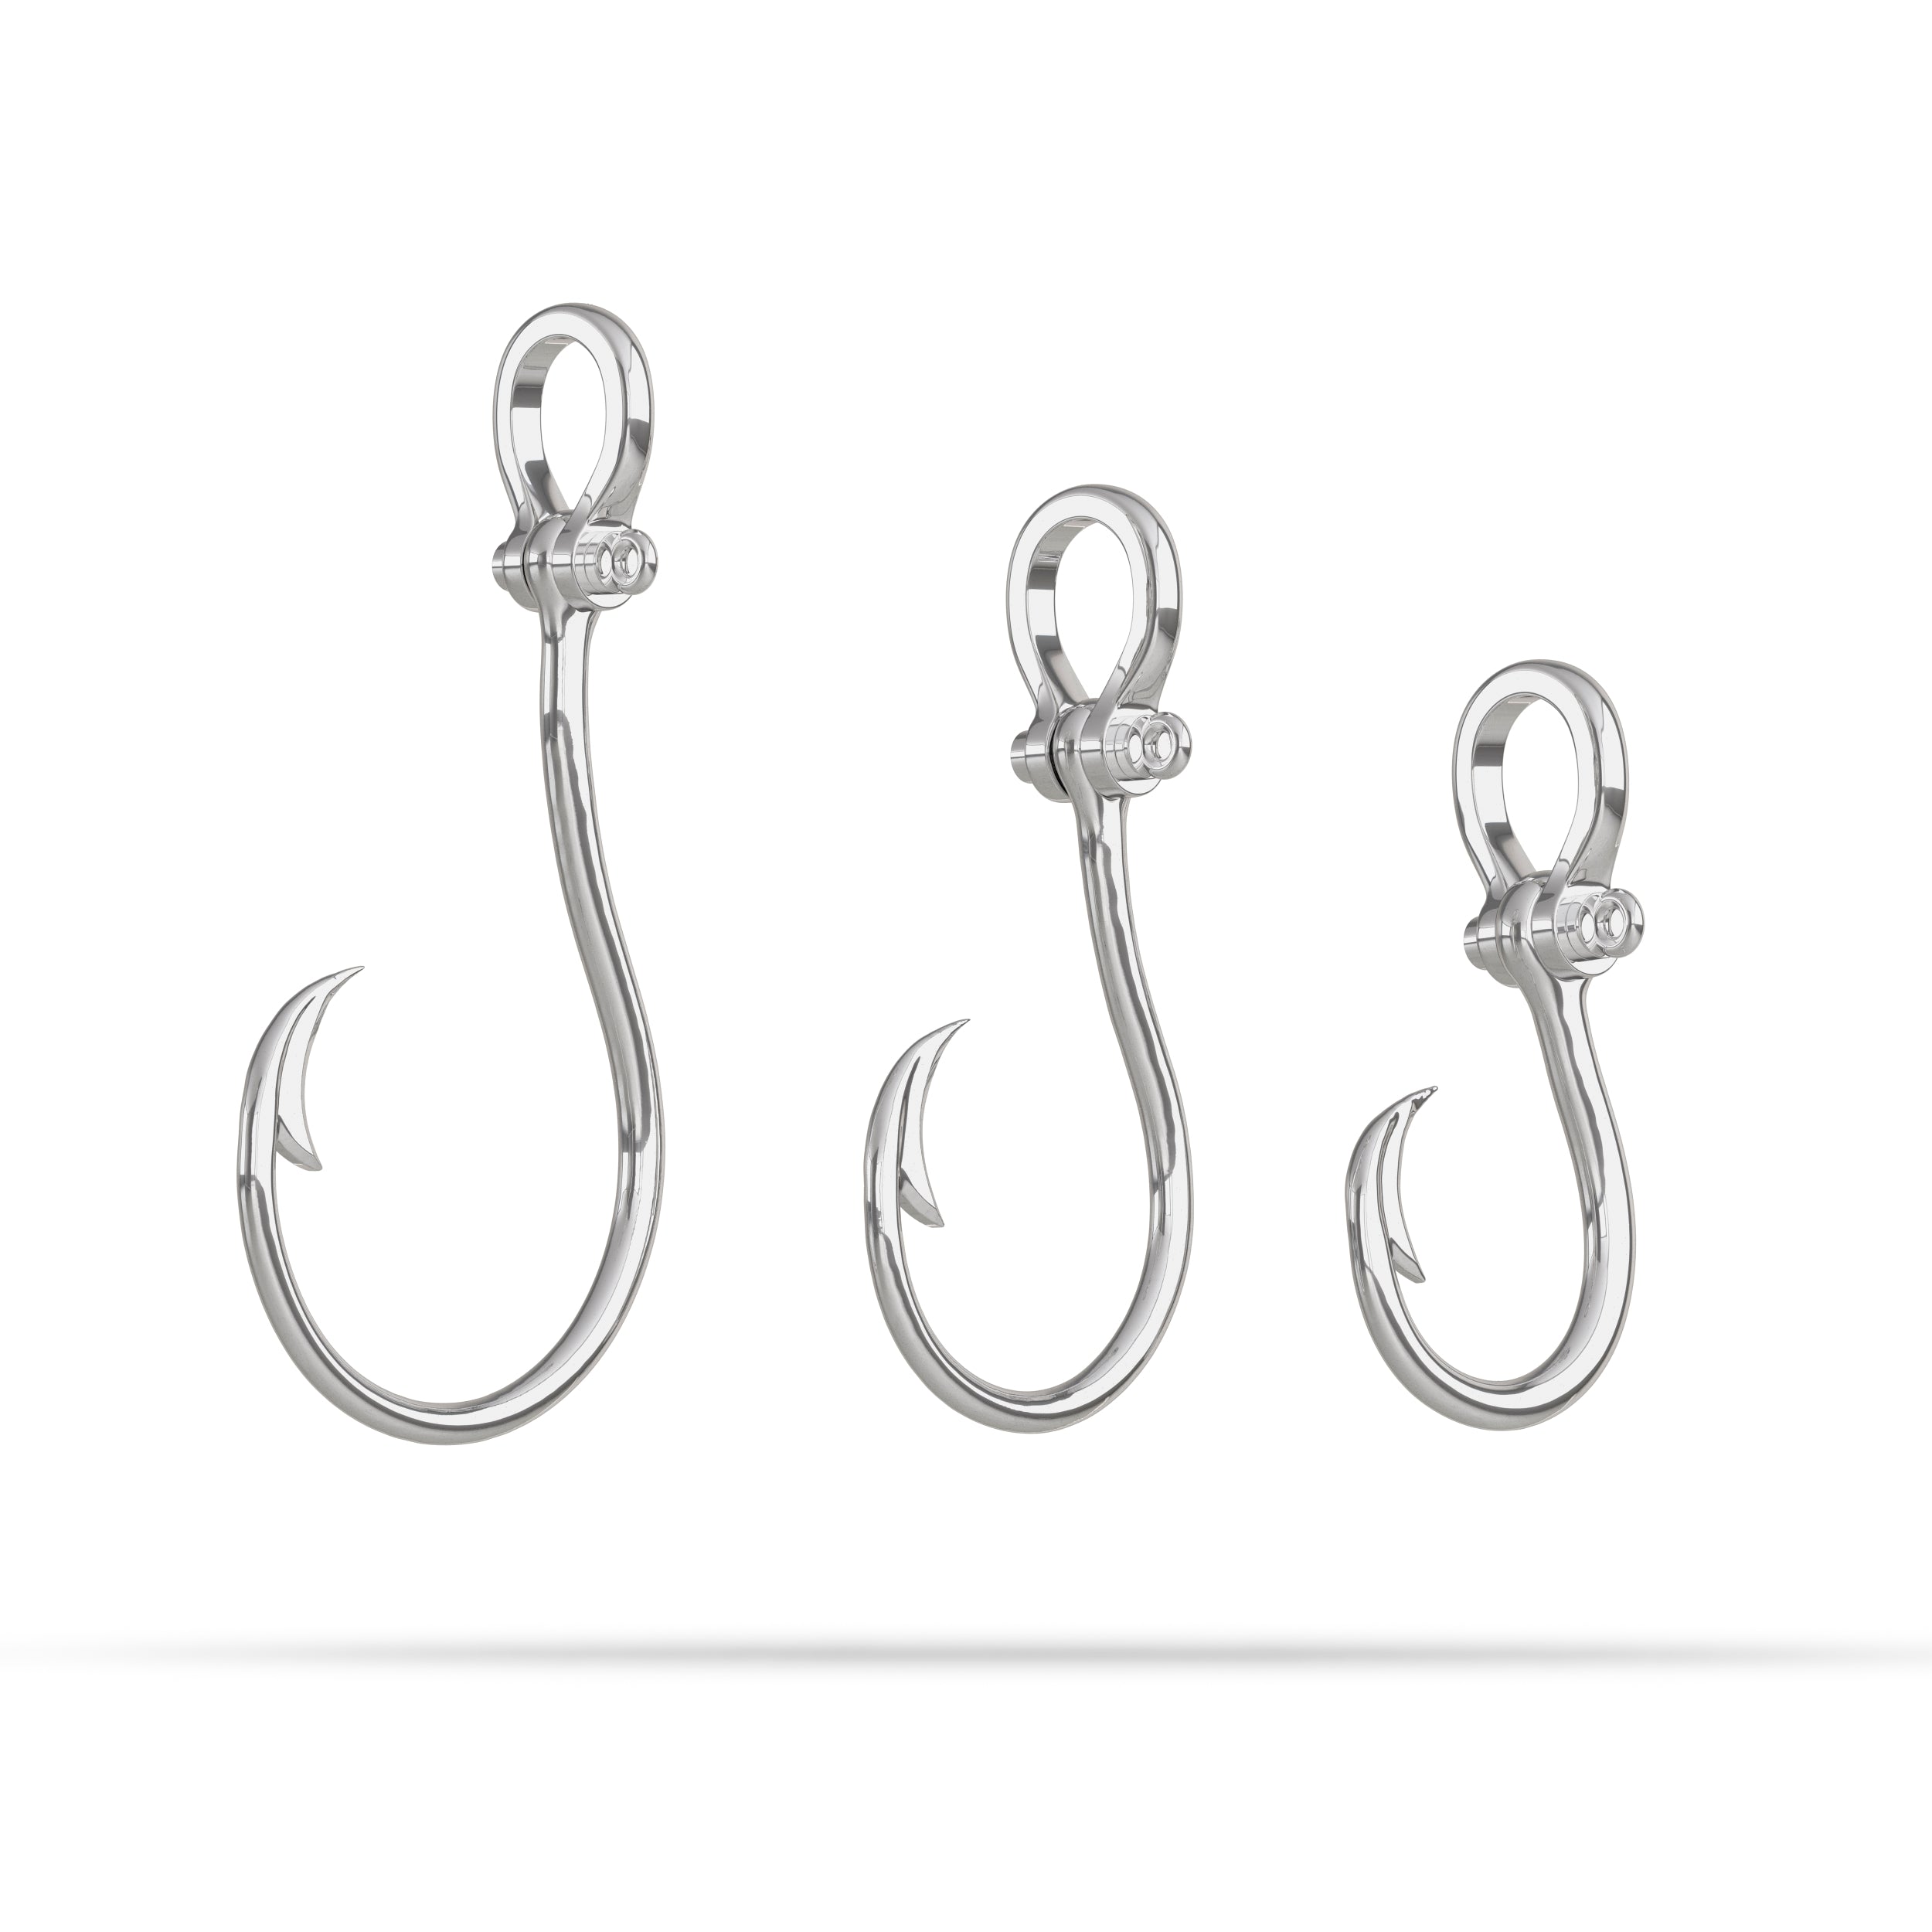 3 Silver fishing hook pendants with Shackle Bail 